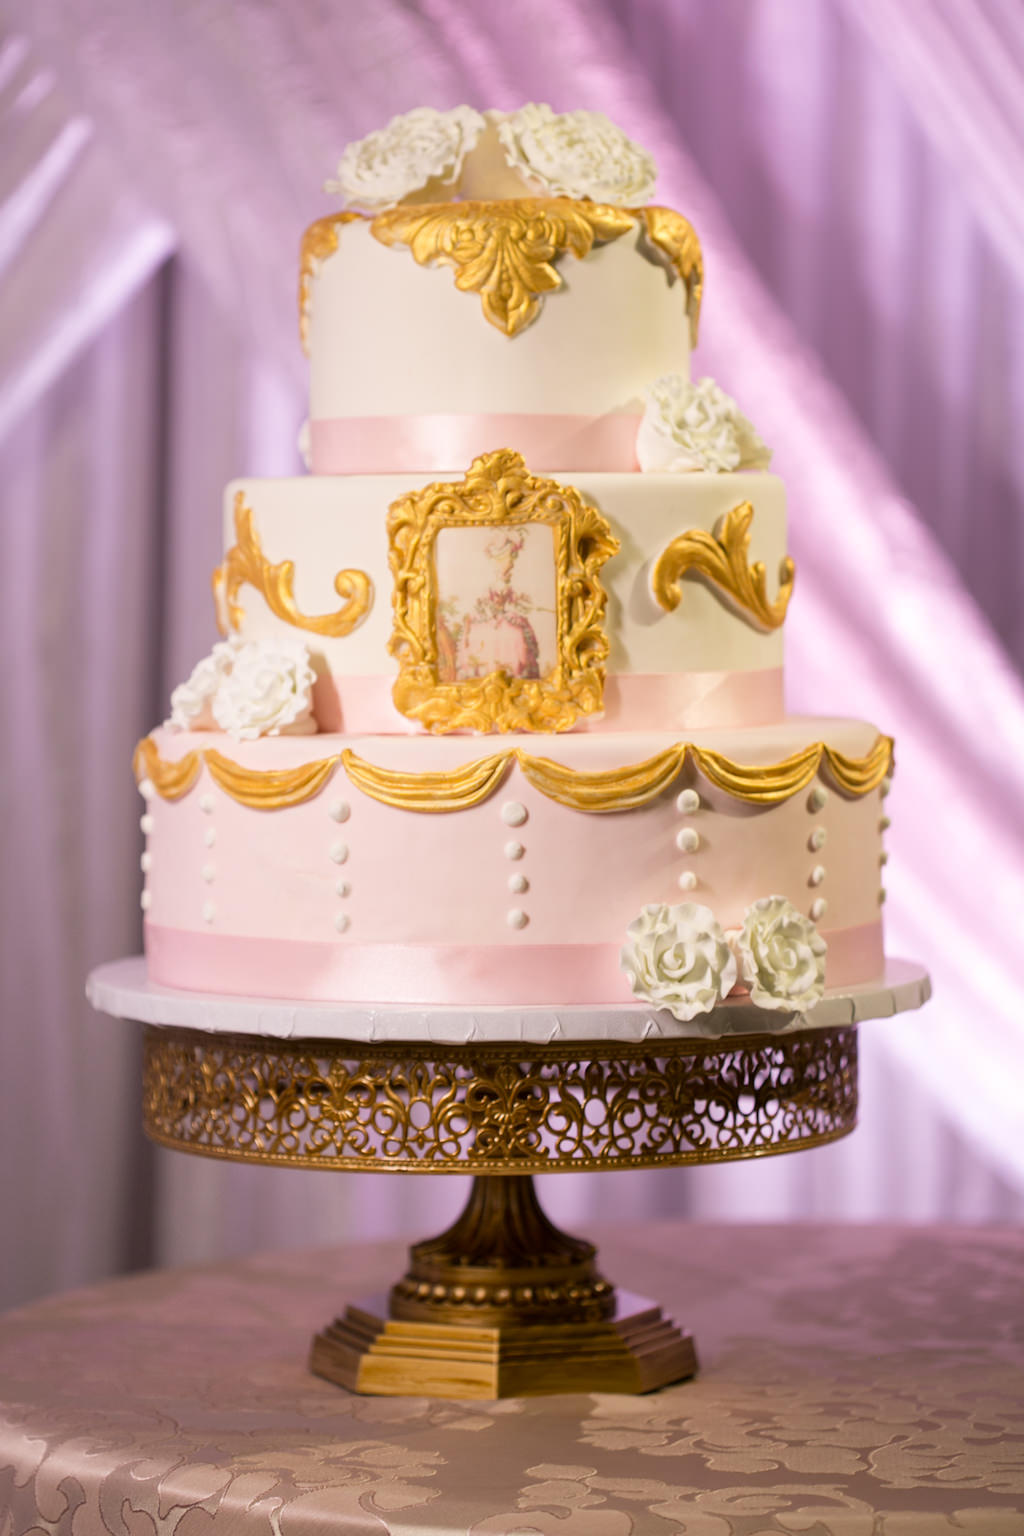 Three Tiered Round Wedding Cake with White Floral and Gold Gilded Picture Frame and Pink Ribbon Decor on Antique Gold Cake Stand | Tampa Bay Wedding Bakery A Piece of Cake